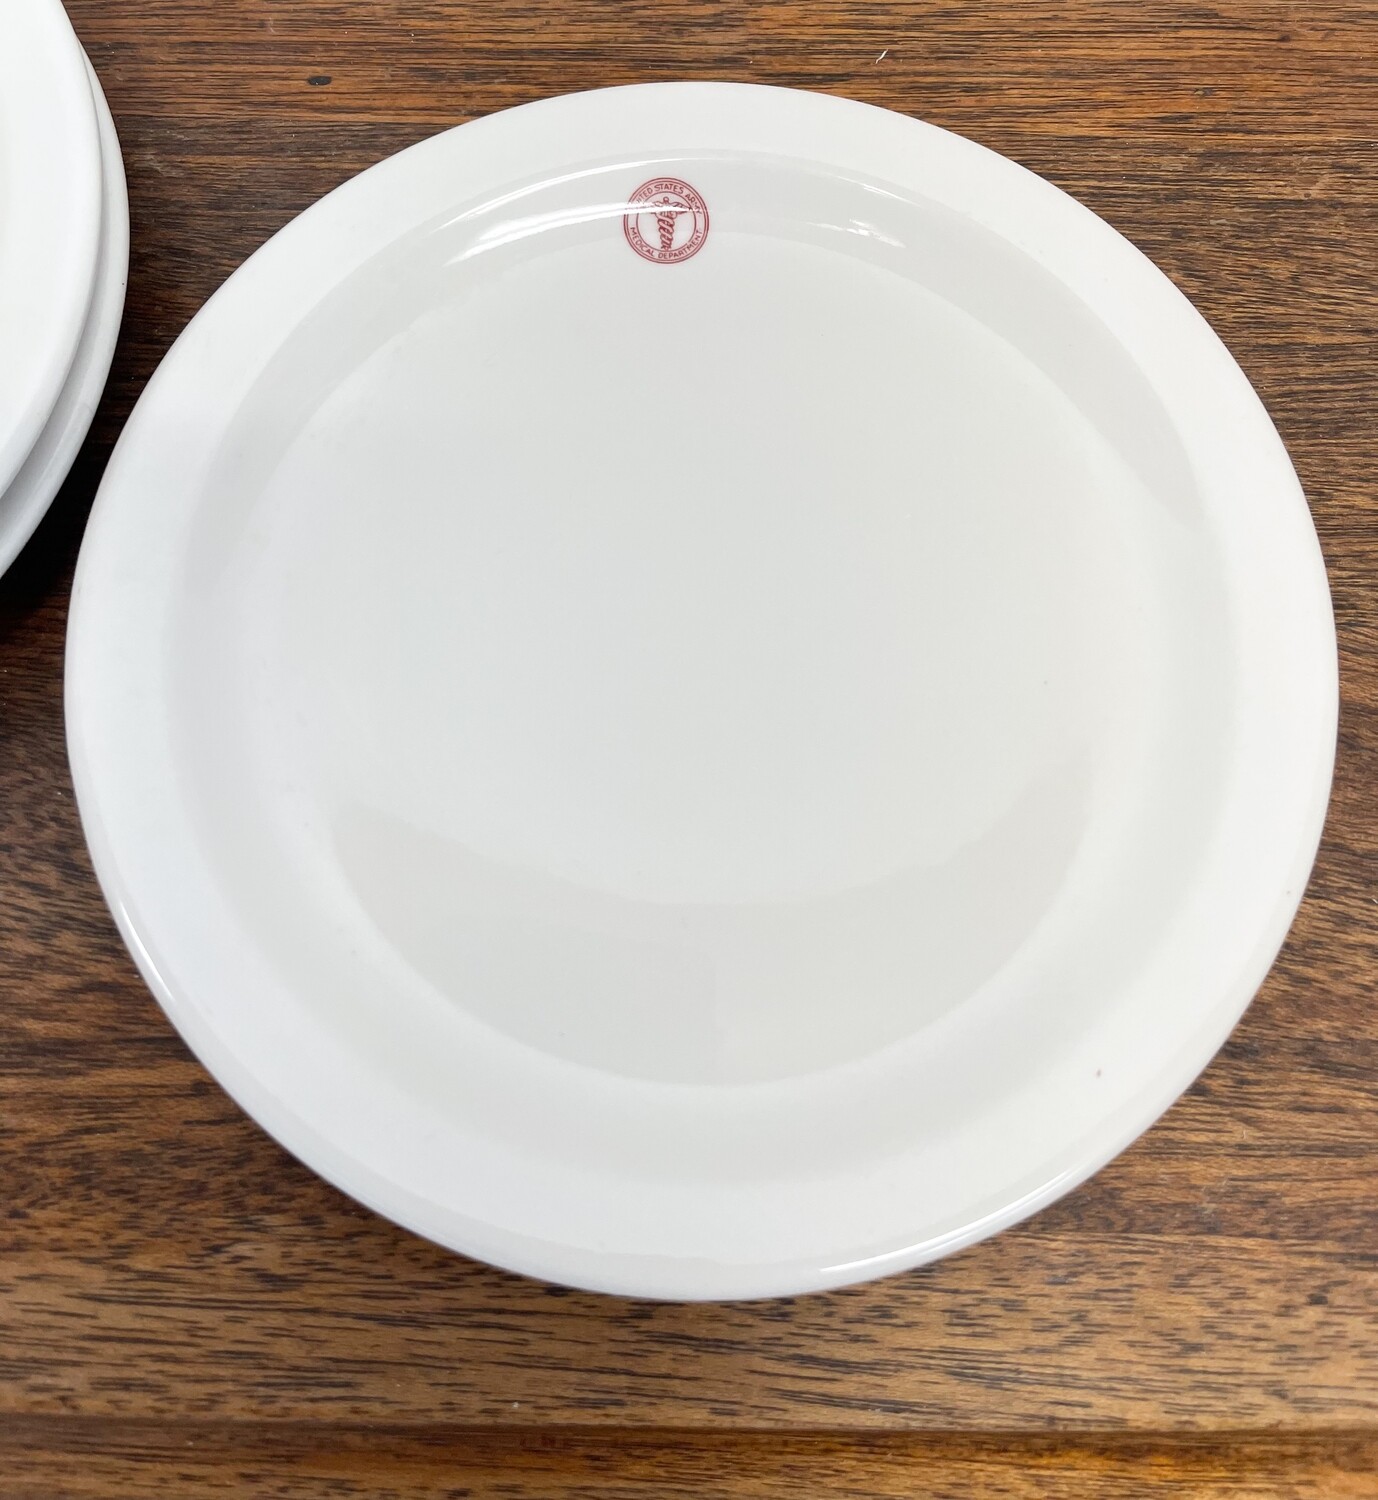 WWll United States Army Medical Department Salad Plates Set of 3